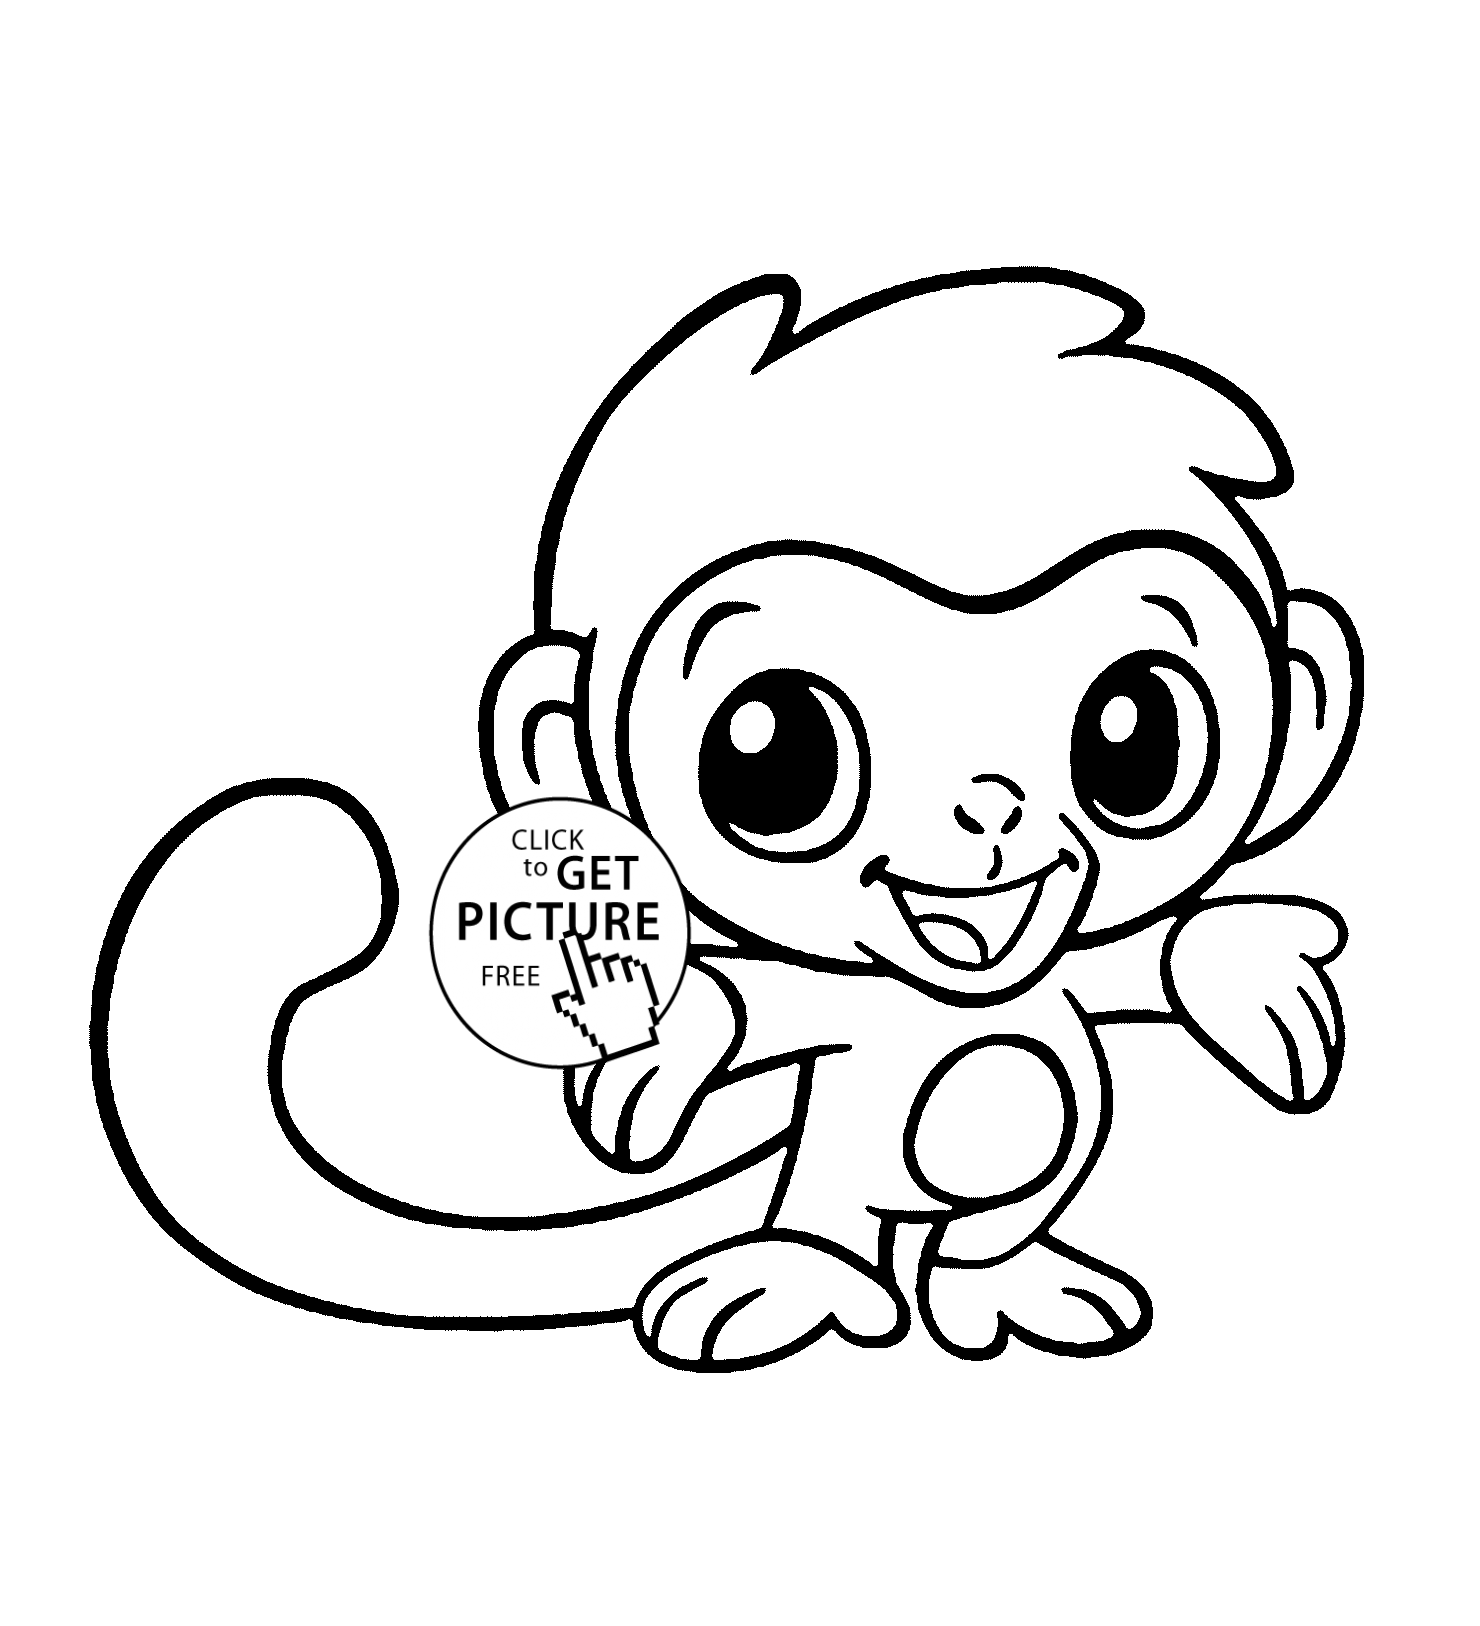 Little Monkey animal coloring page for kids, animal coloring pages ...